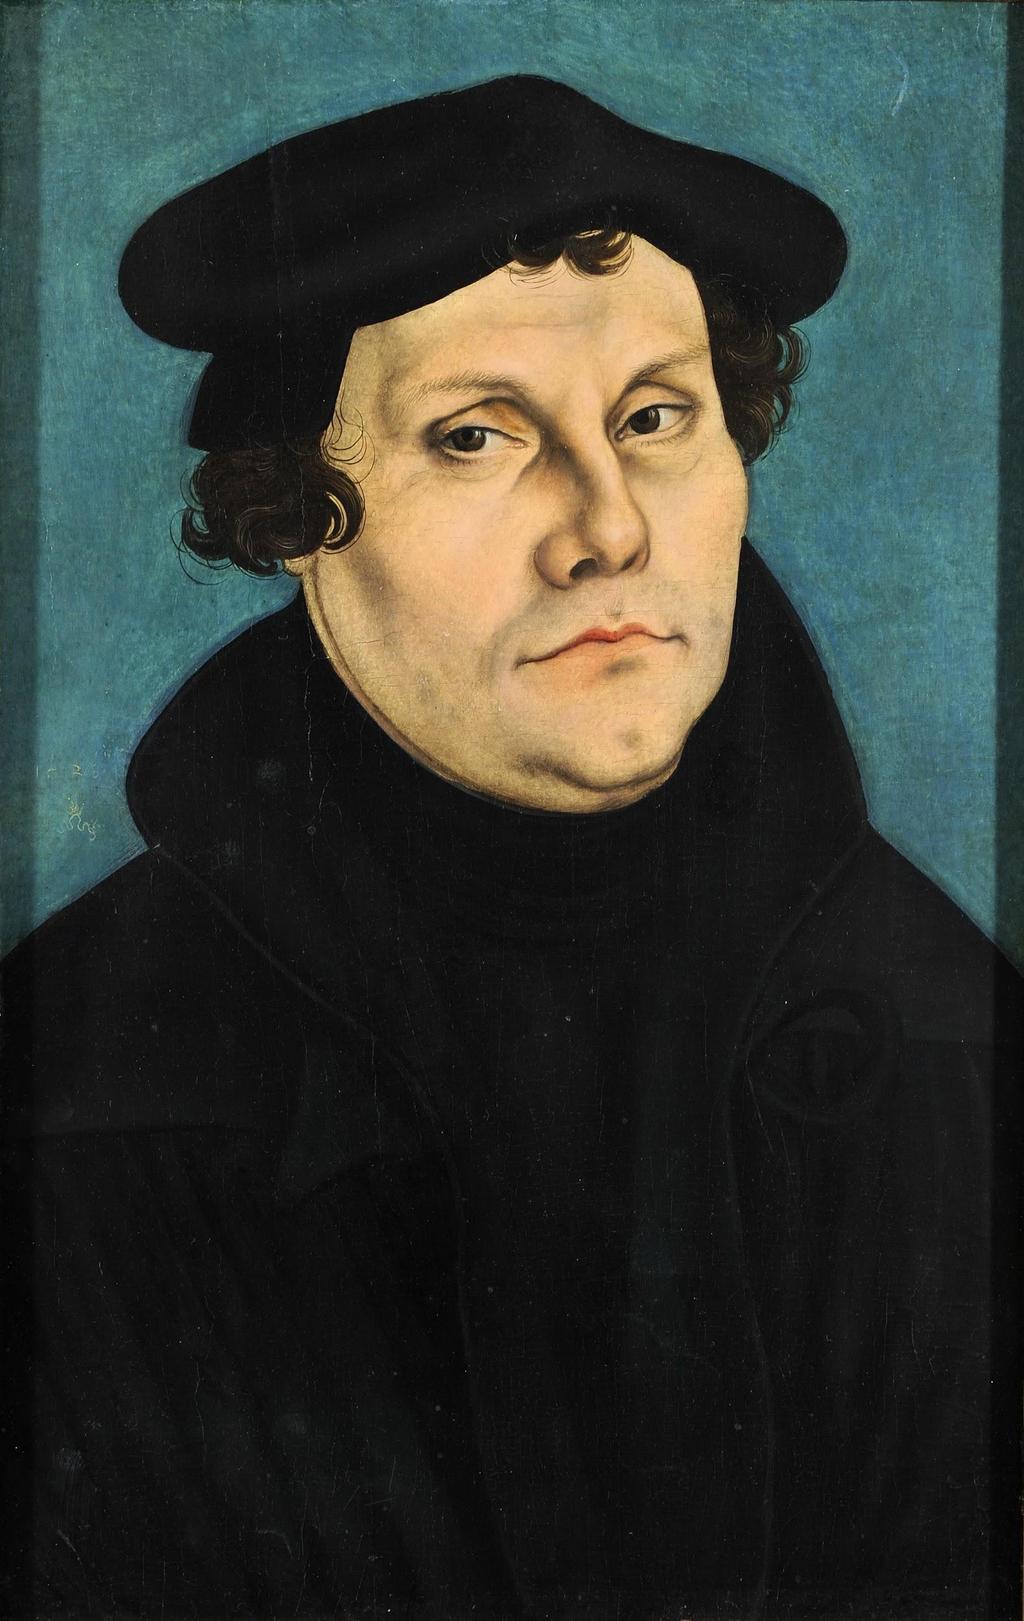 Period of the Religious Change Martin Luther s famous document of 1517, The 95 Theses, was the catalyst for the Protestant Reformation He protested the church s act of absolving people of their sins